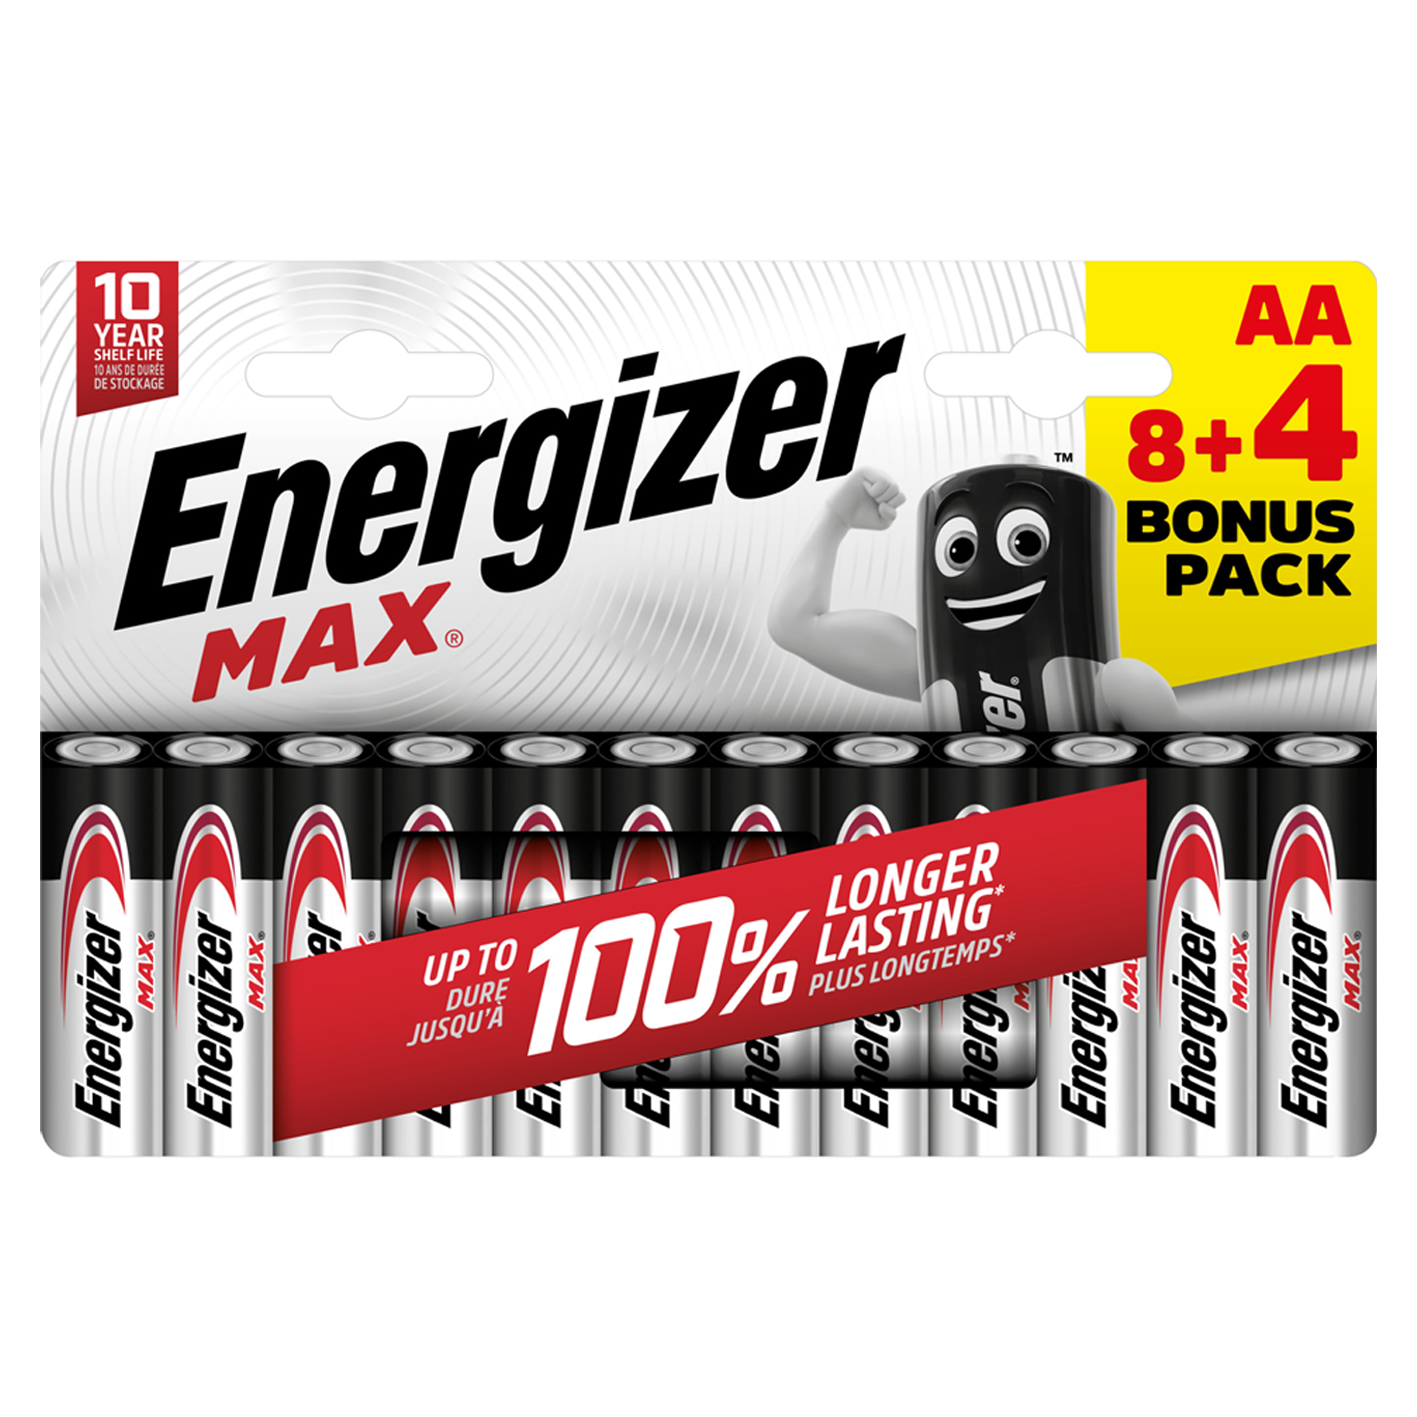 Energizer AA Max Alkaline, Pack of 8+4